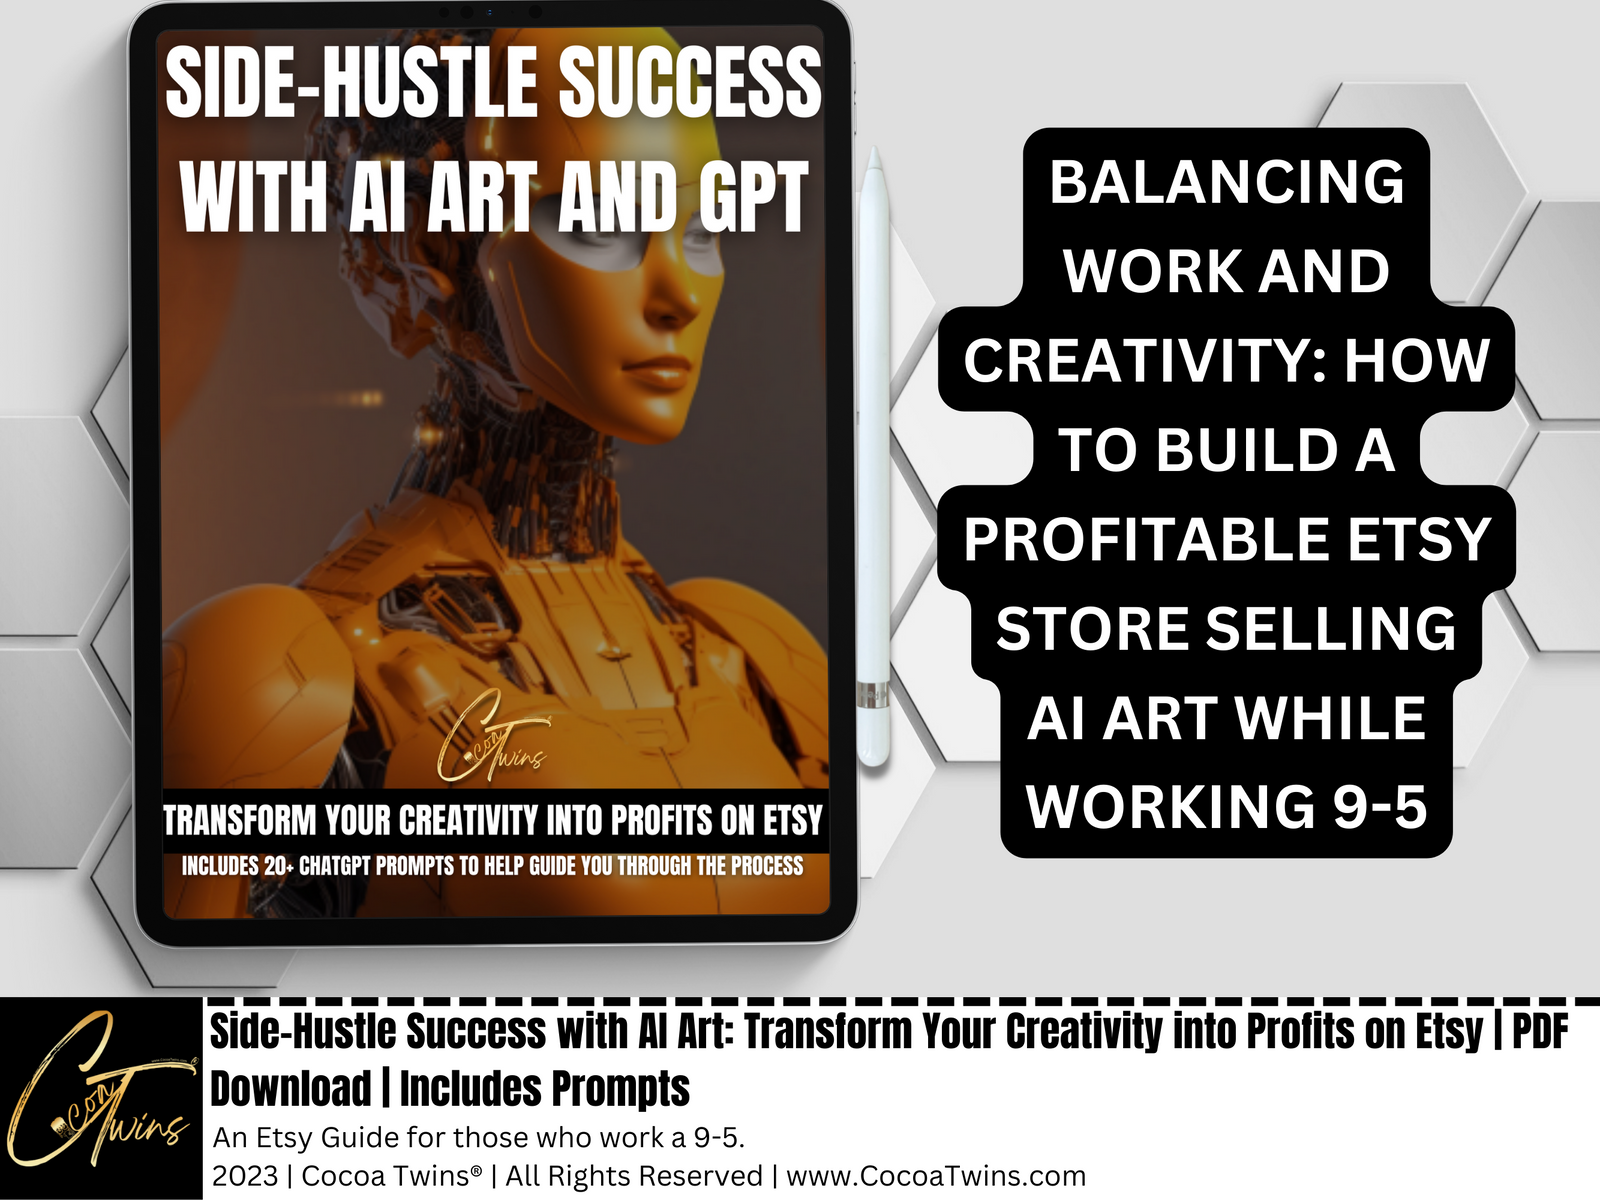 Side-Hustle Success with AI Art - Transform Your Creativity into Profits on Etsy| eBook | PDF Download